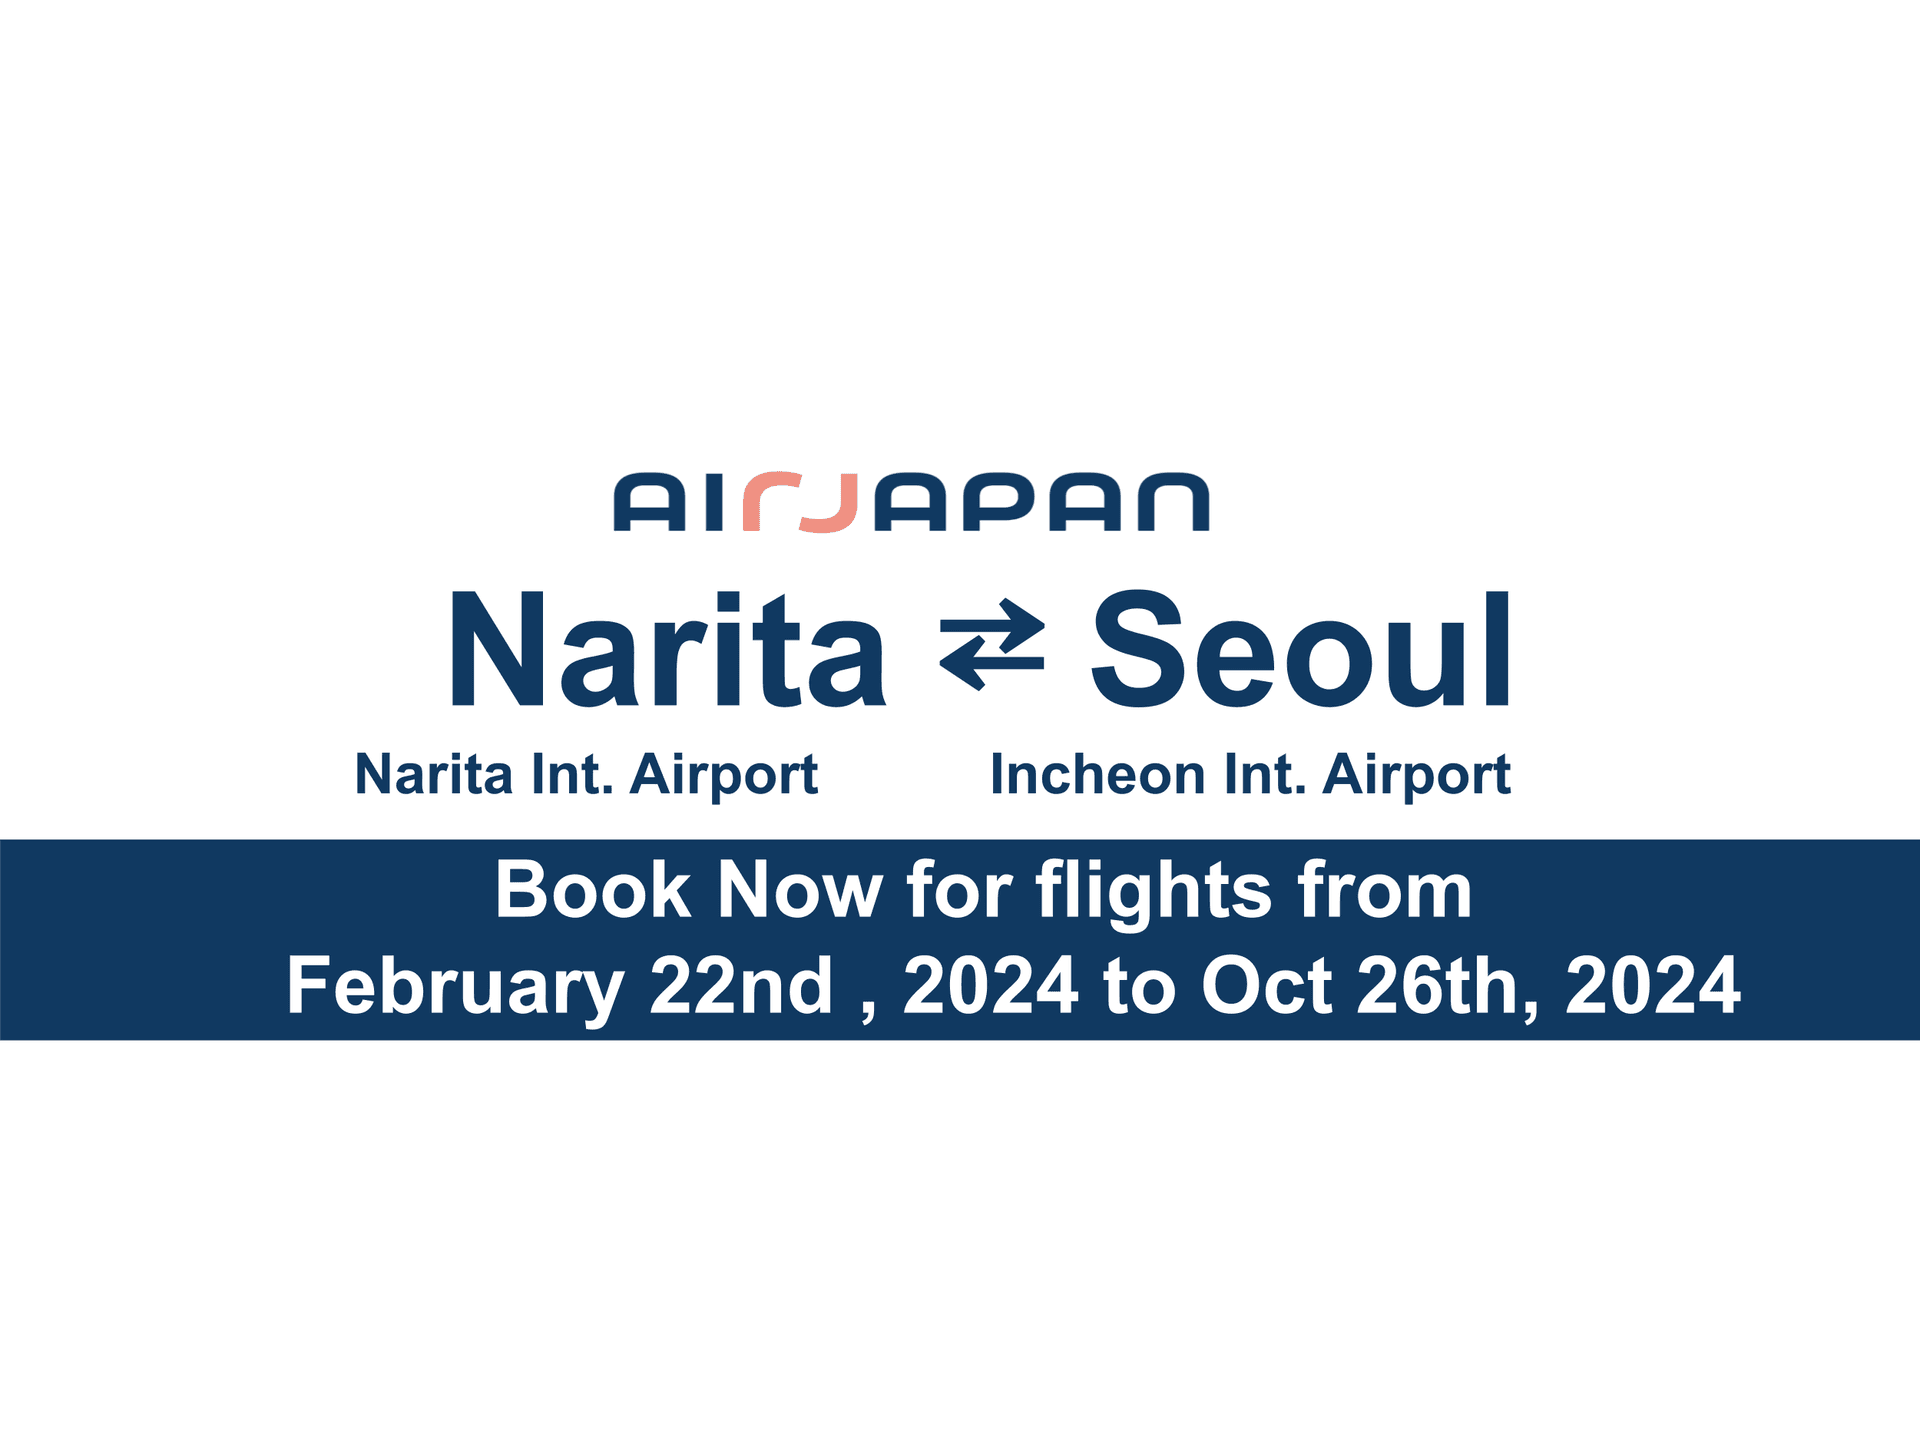 The 2024 summer schedule between Narita ⇔ Seoul is now on sale.